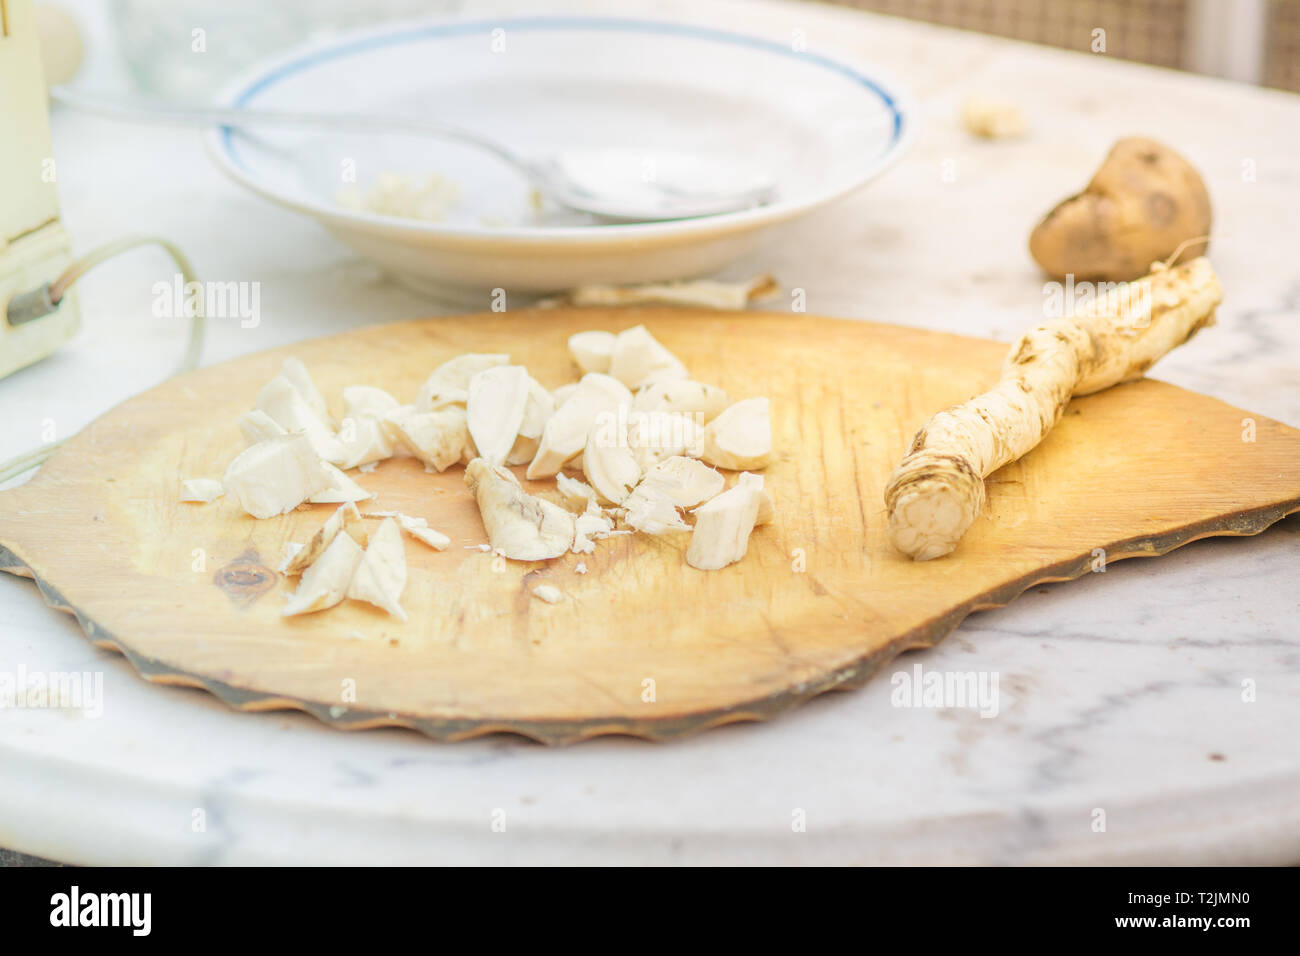 Horseradish root sliced on the board. Table with a plate. Stock Photo